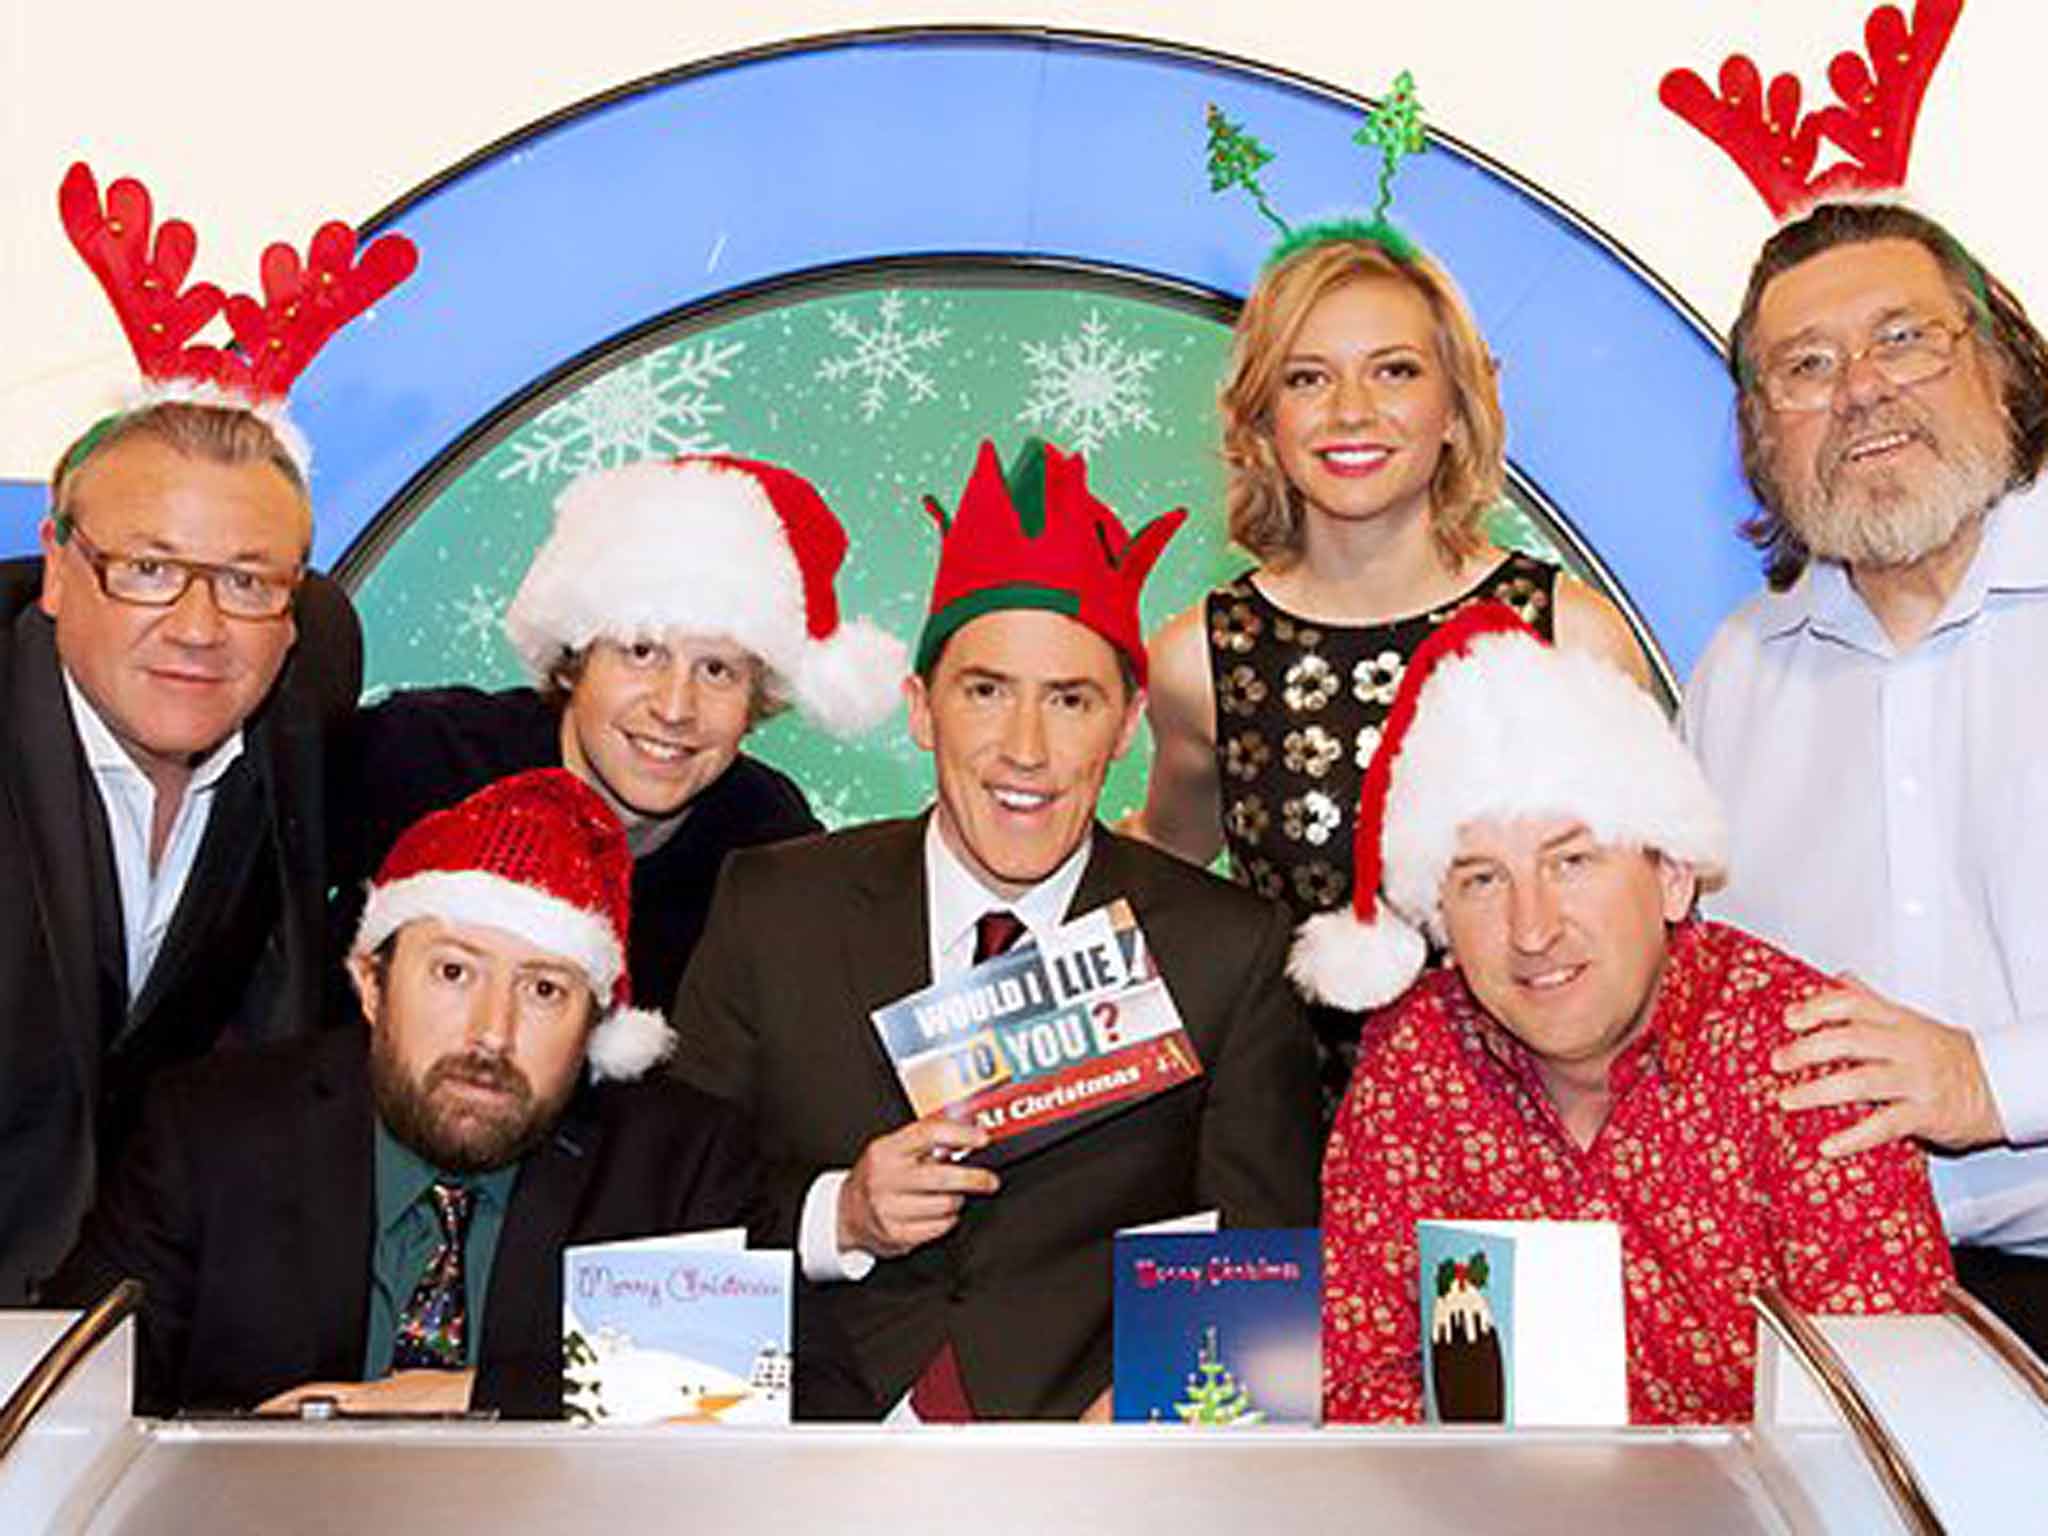 Would I Lie To You? (BBC1) at Christmas